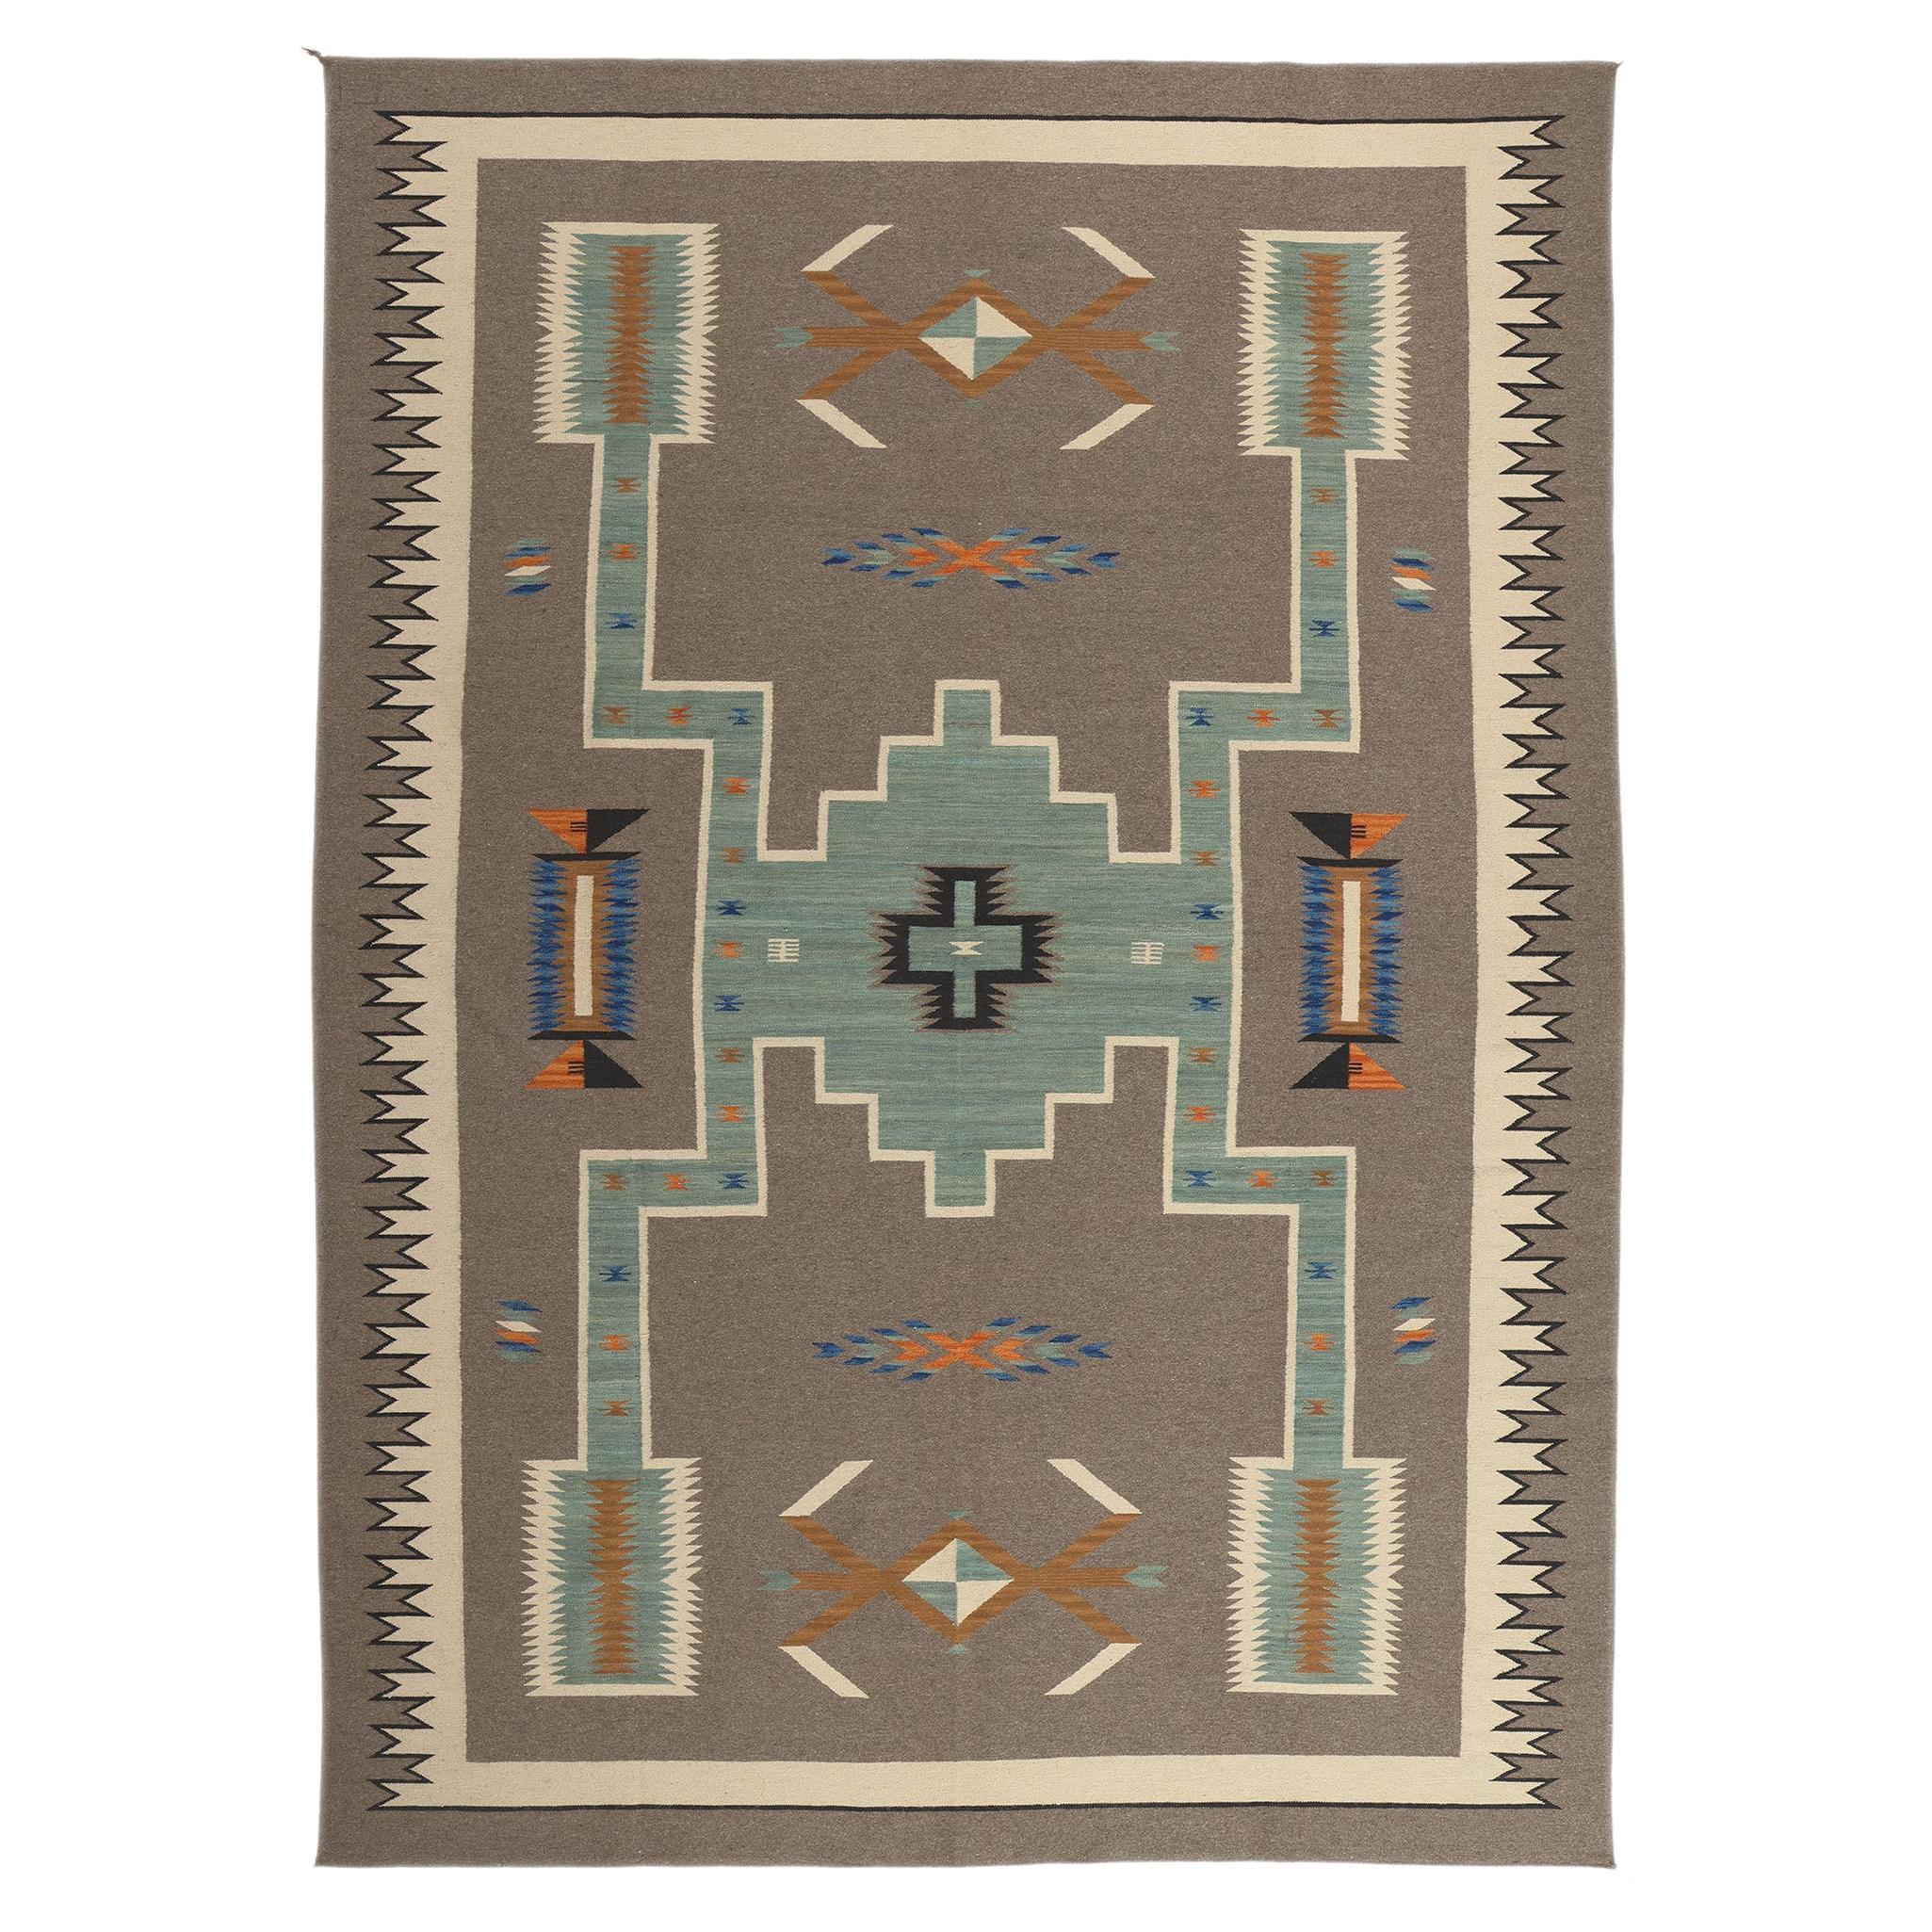 Contemporary Santa Fe Southwest Modern Navajo-Style Rug with Storm Pattern